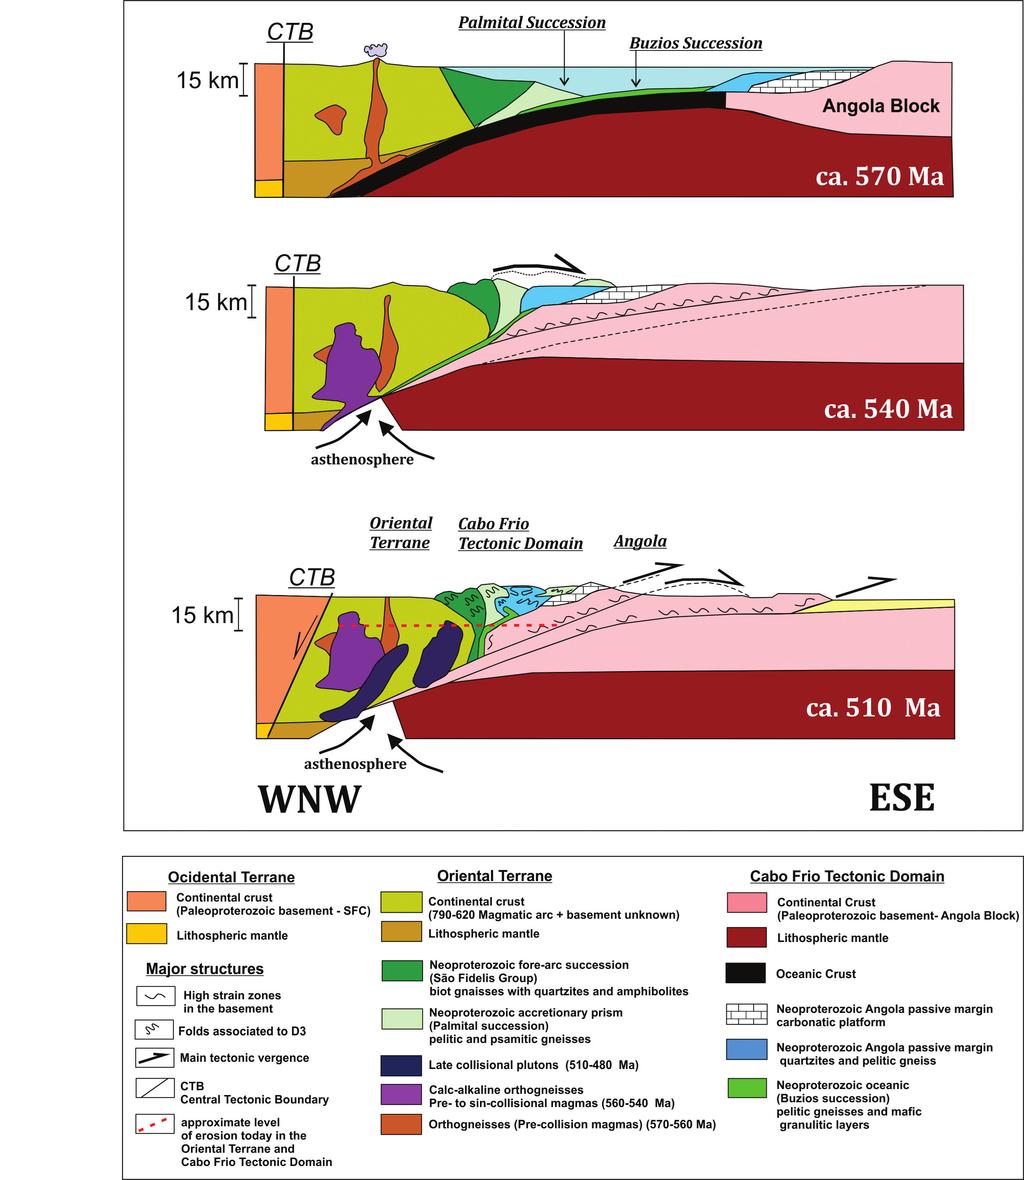 The Cabo Frio Tectonic Domain evolution: a review Palmital Succession CTB 15 km CTB 15 km asthenosphere Oriental Terrane Cabo Frio Tectonic Domain Angola CTB 15 km asthenosphere WNW ESE Occidental